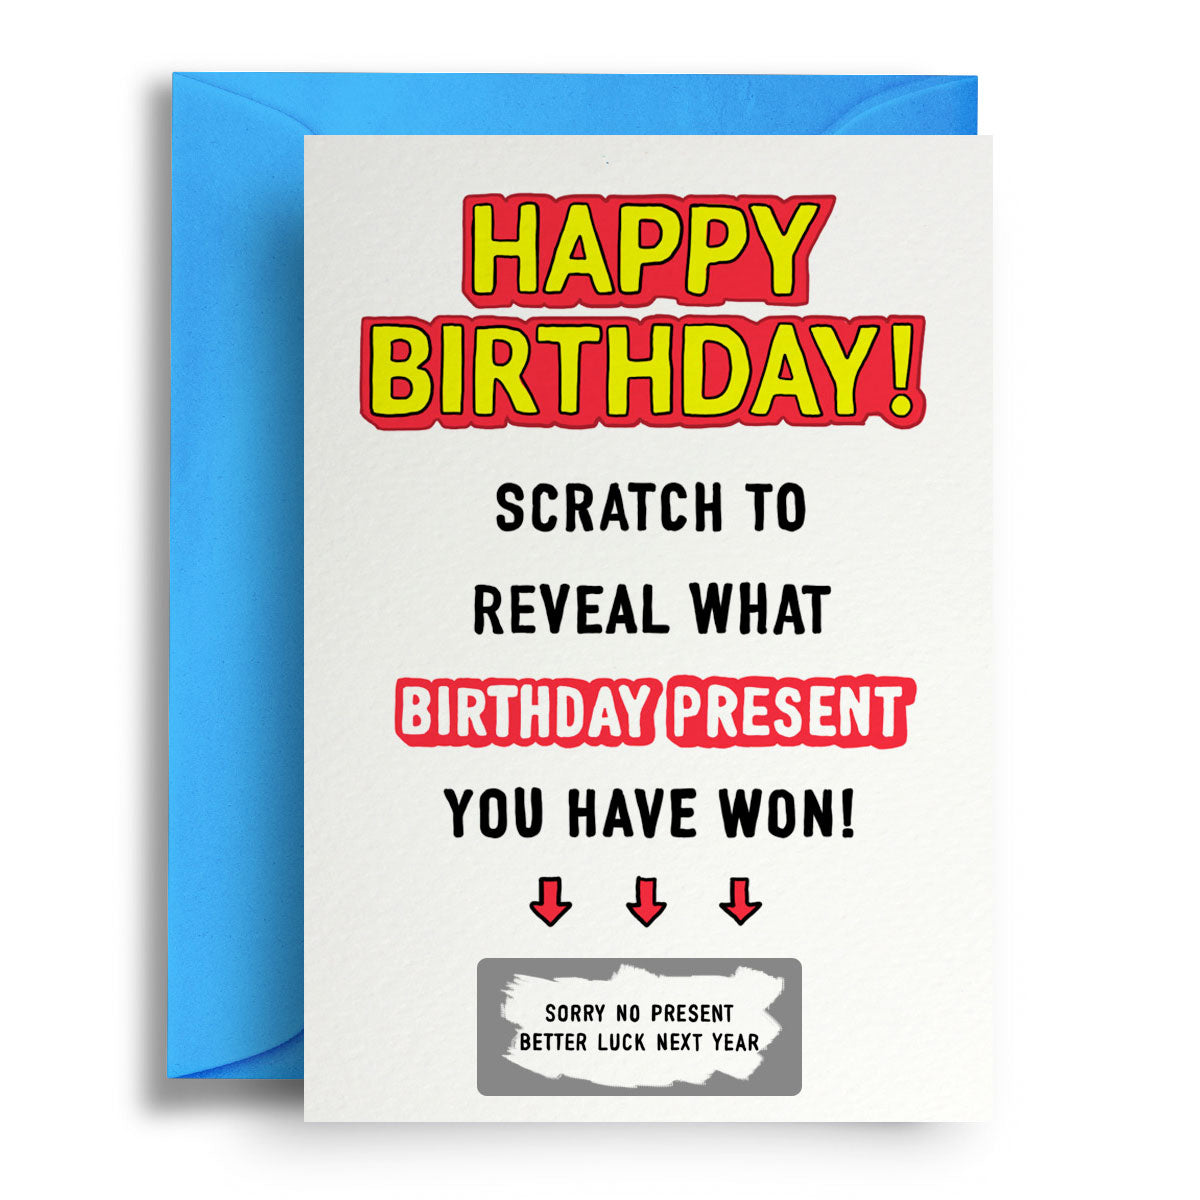 Happy Birthday Scratch To Reveal (No Present) - Greetings Card